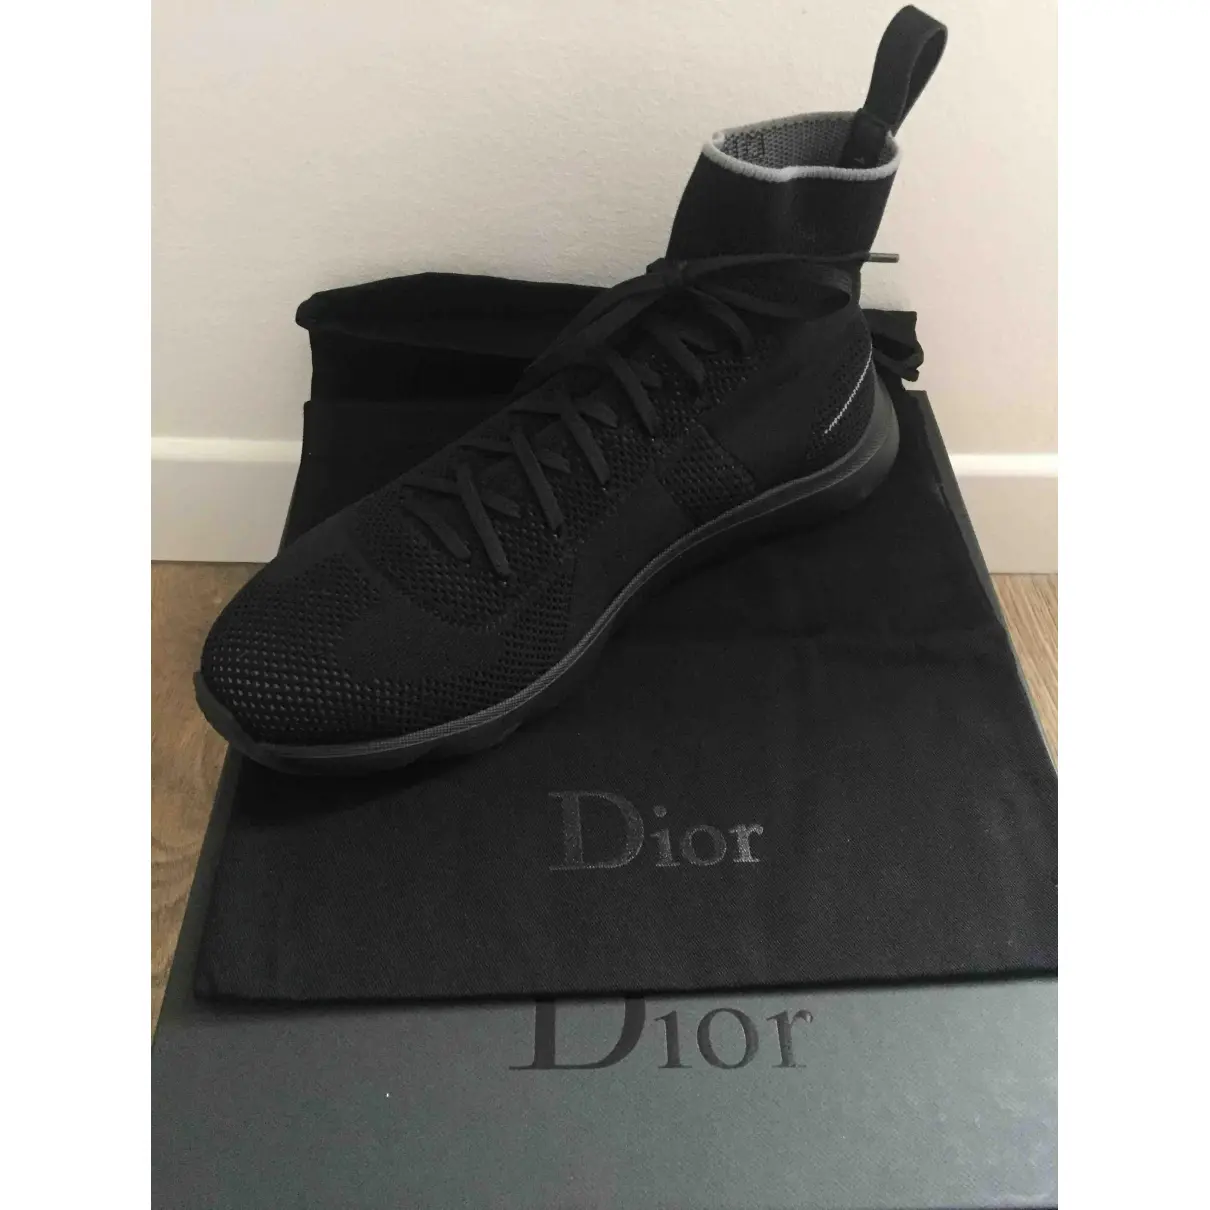 Buy Dior Homme Cloth high trainers online